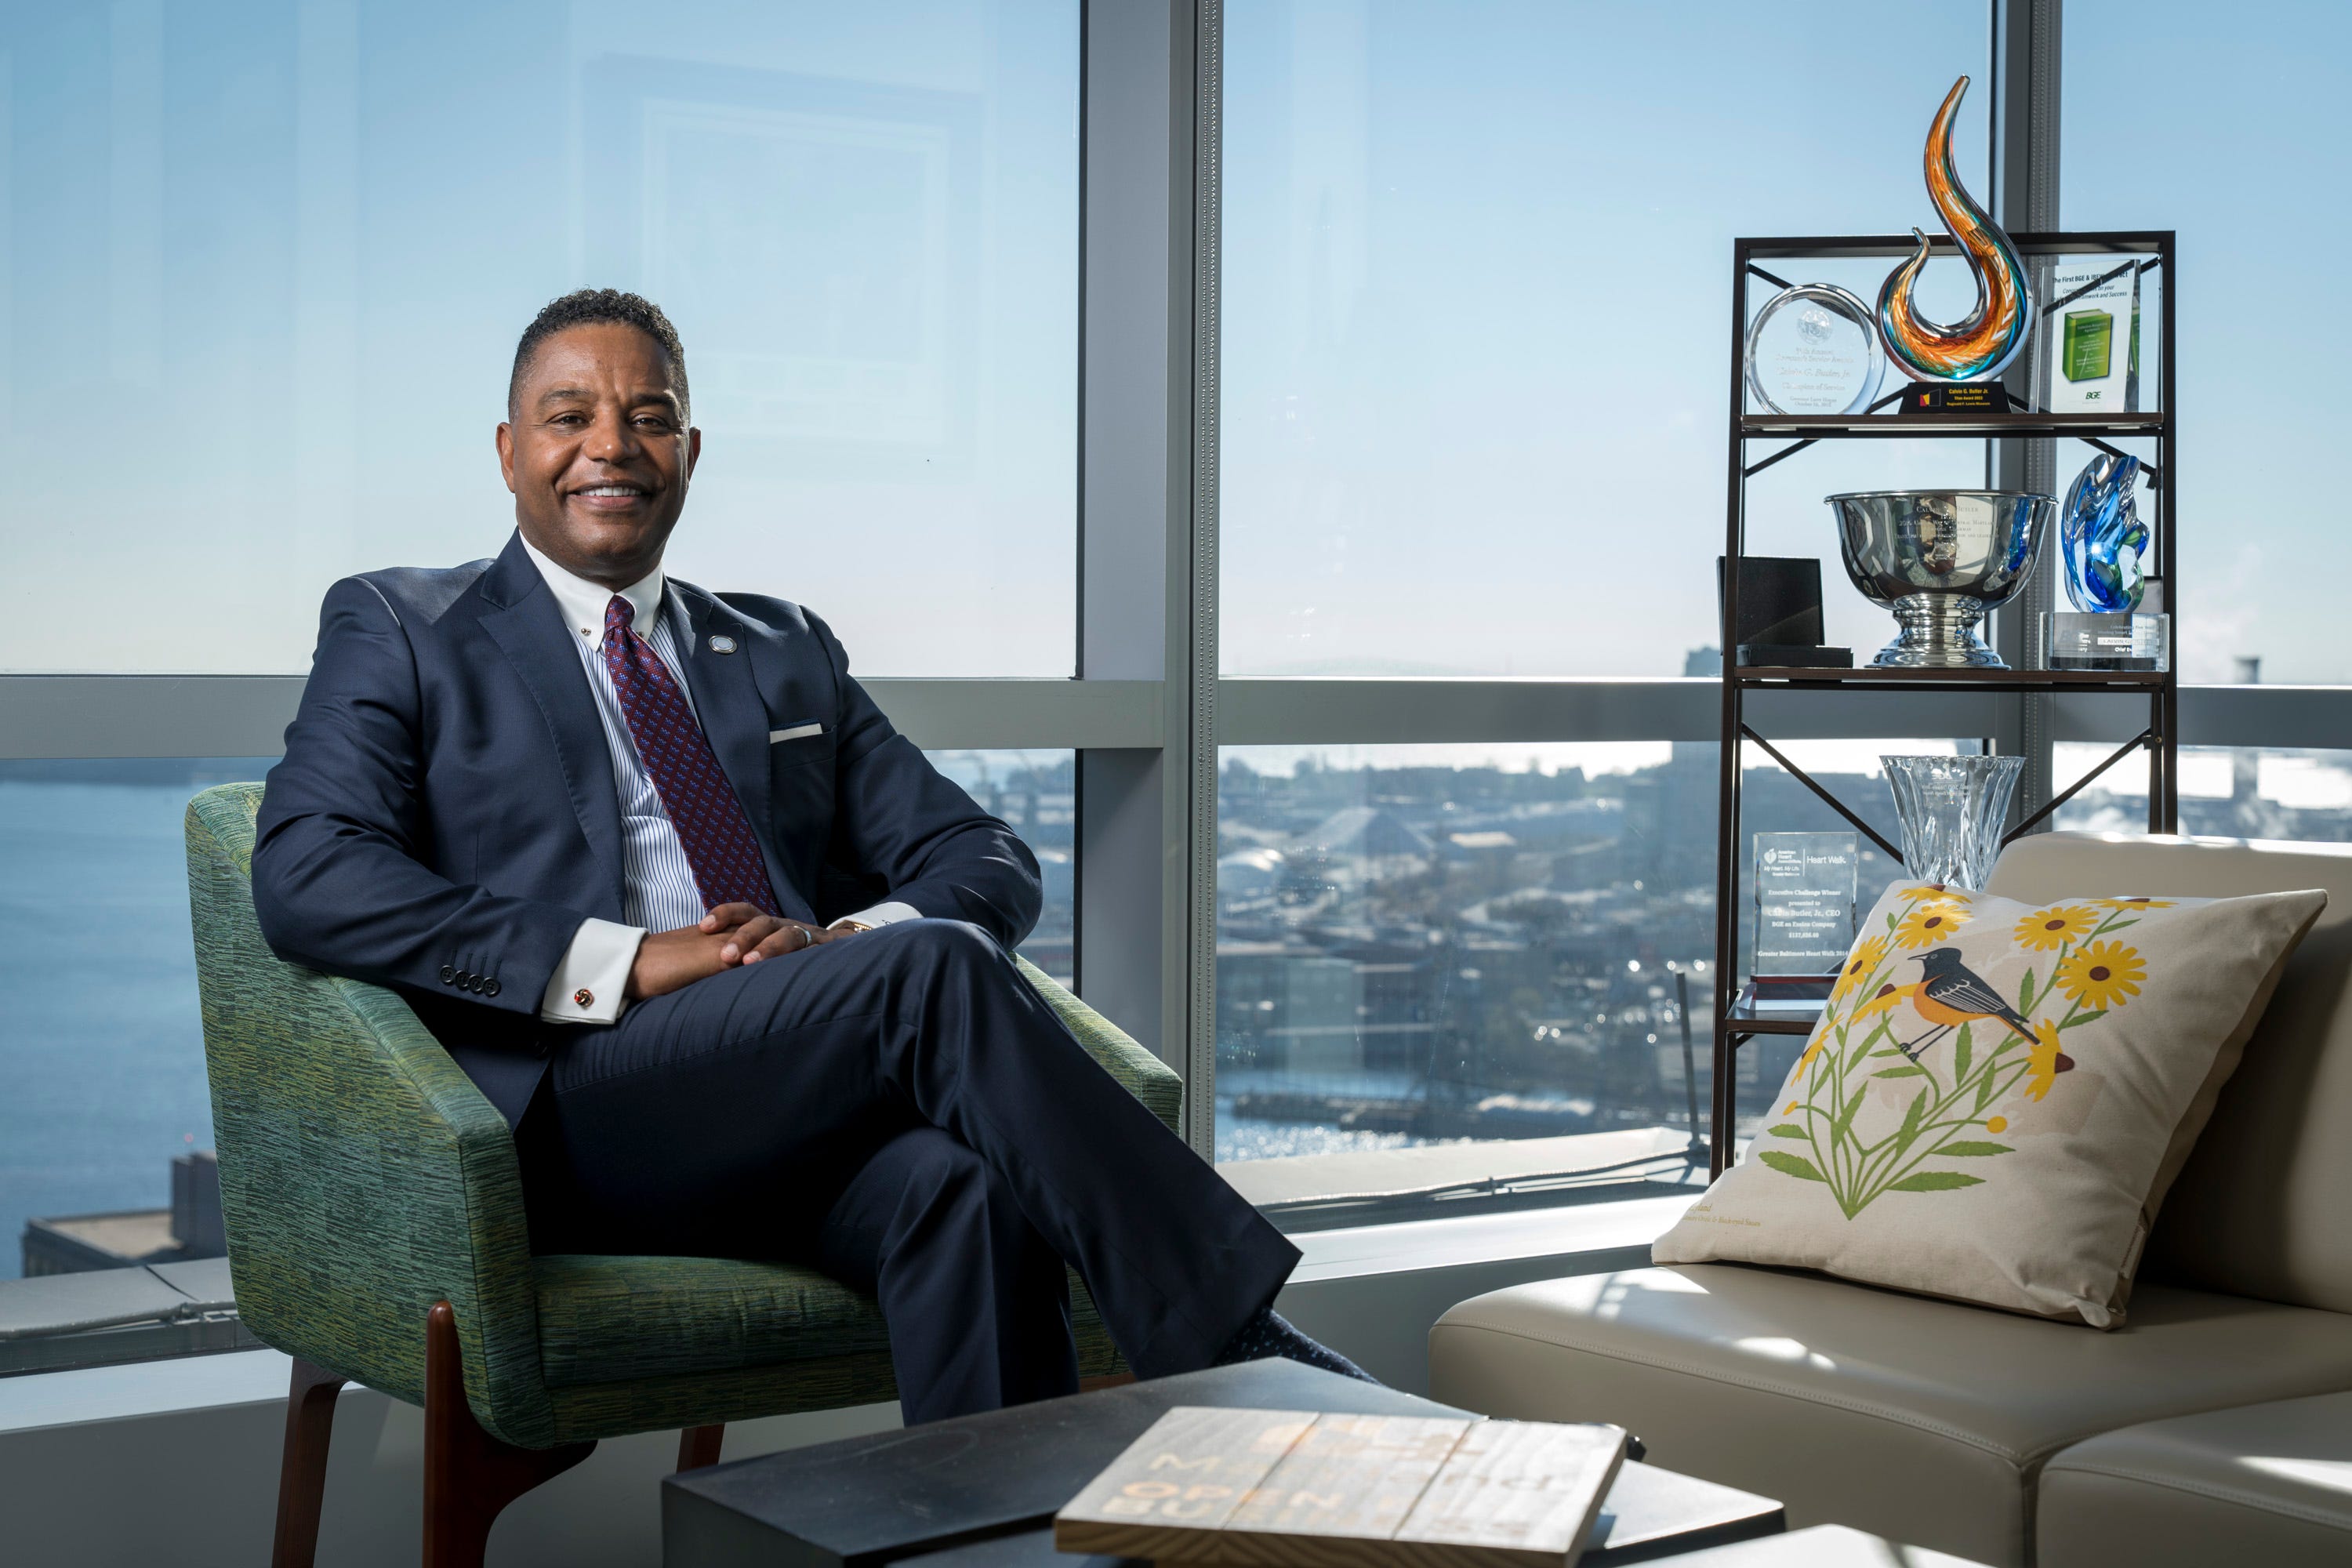 Calvin Butler, Jr., President and Chief Operating Officer at Exelon Corporation, a utility company serving customers in in New Jersey, Maryland, Illinois, Delaware, Pennsylvania and the District of Columbia, poses for a portrait in his office in the Exelon Building in Baltimore, MD, on Friday, November 18, 2022. Butler will be President and Chief Executive Officer of Exelon as of Dec. 31, 2022.